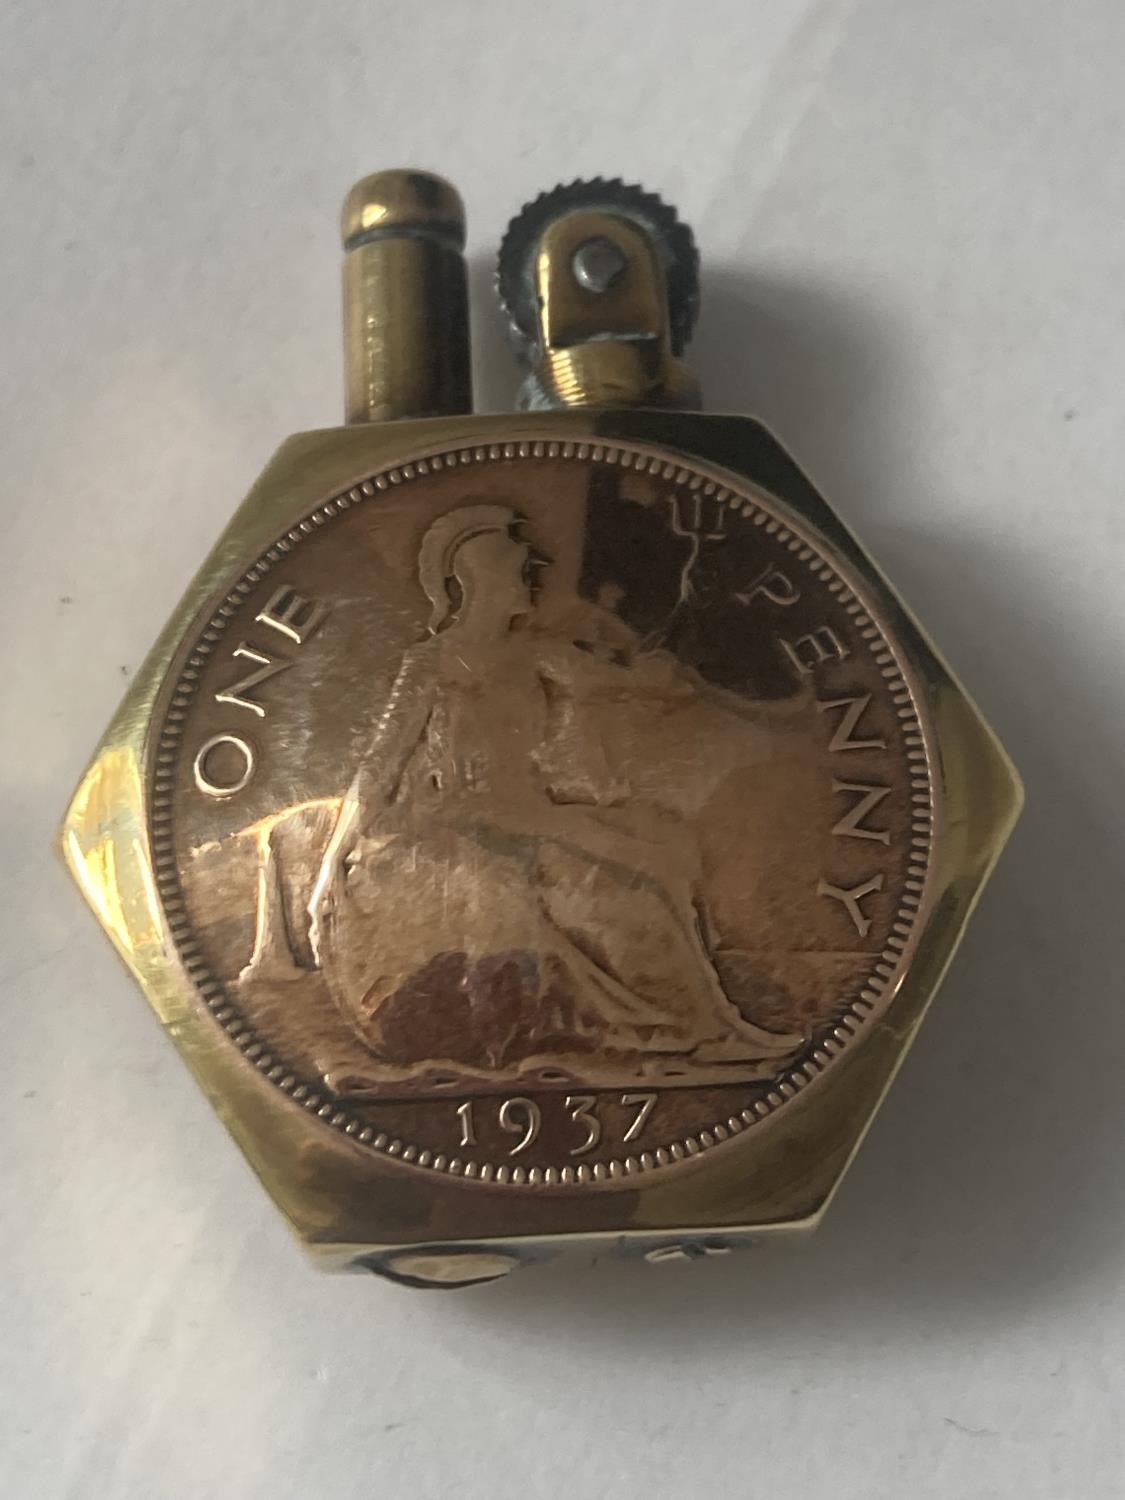 A 1937 ONE PENNY TRENCH ART LIGHTER - Image 3 of 4